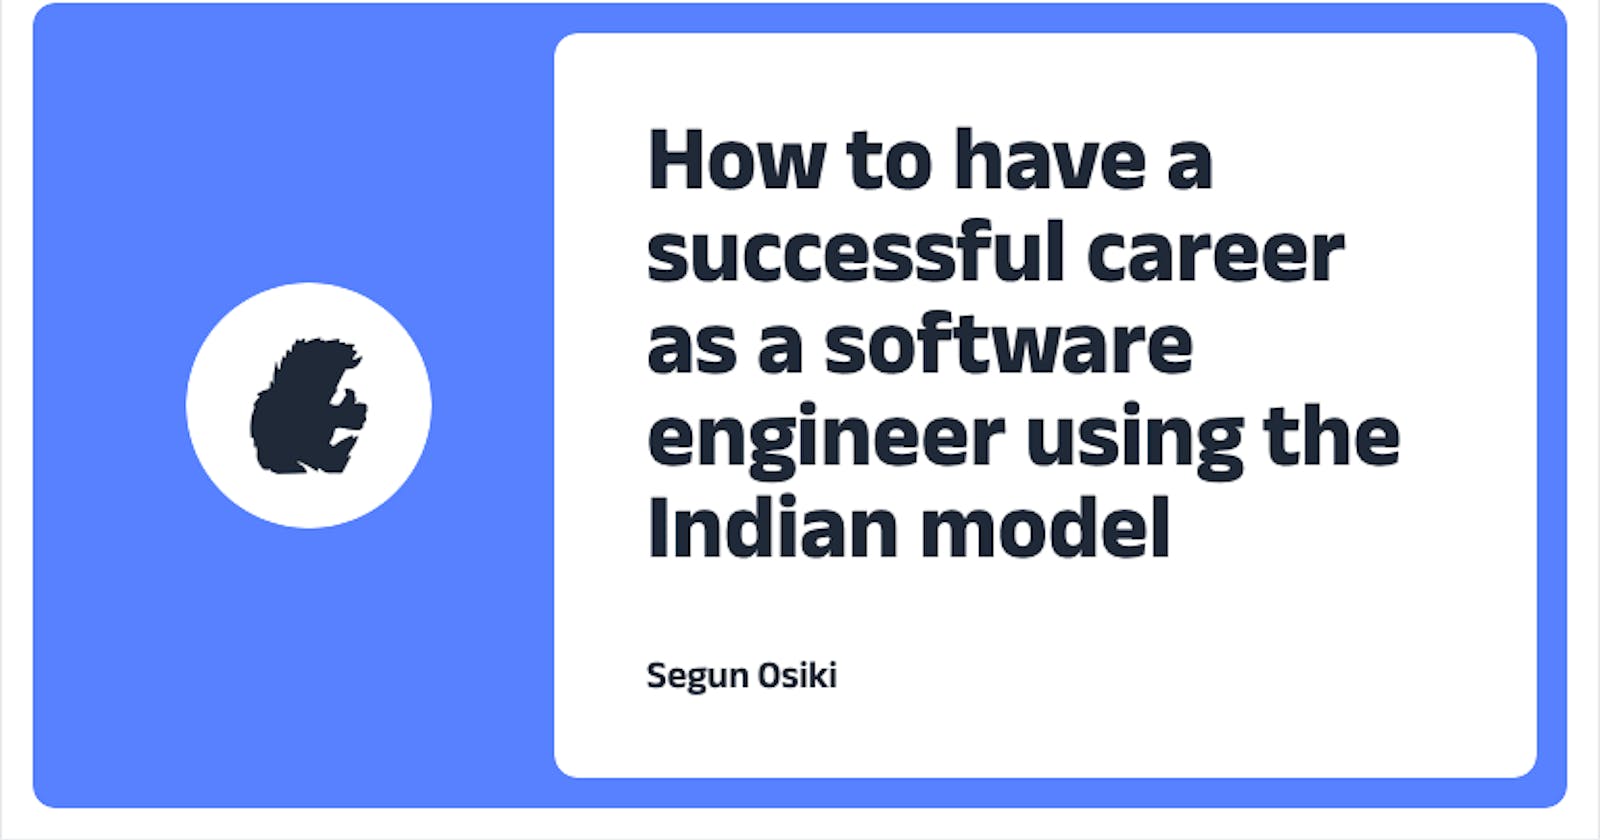 How To Have A Successful Career As A Software Engineer, Using The Indian Model